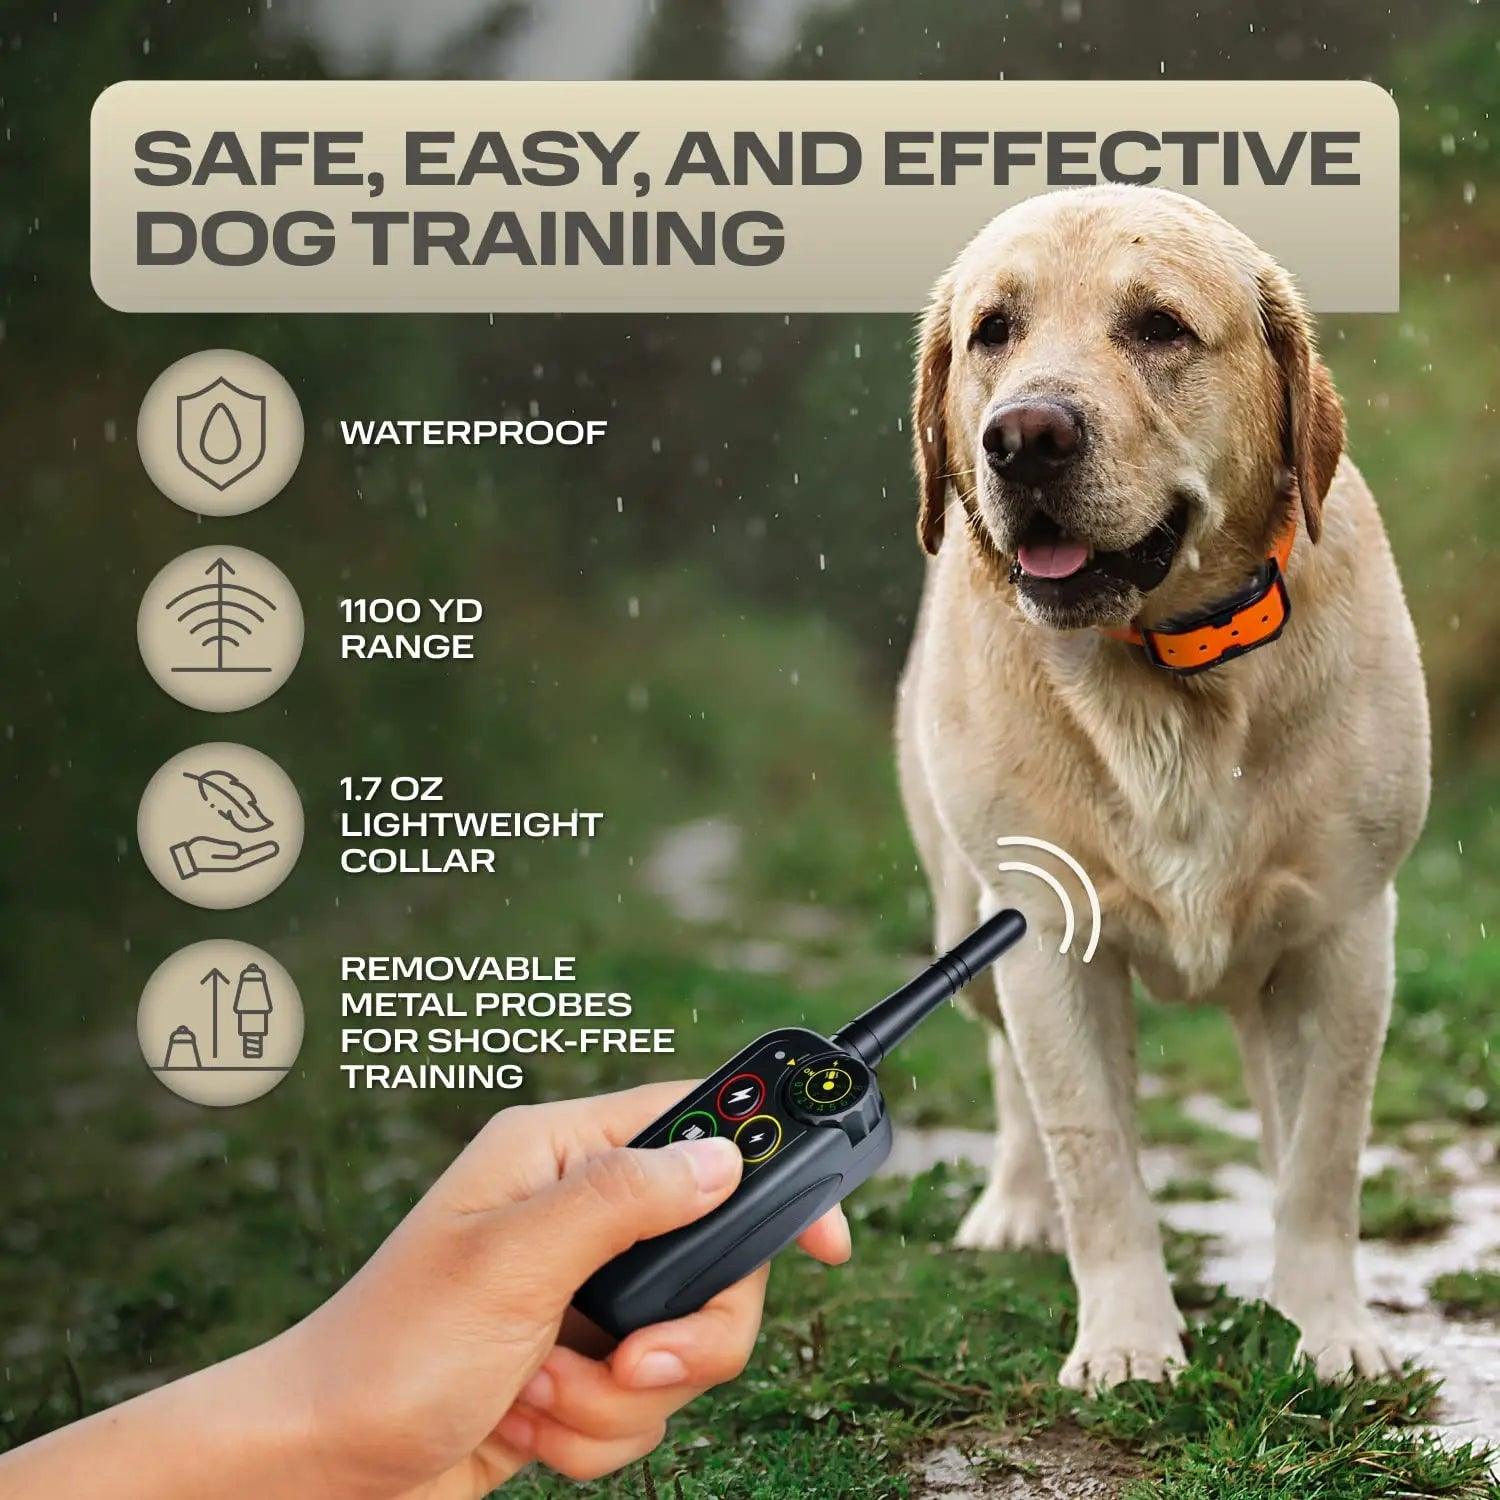 Ultimate 1000m Waterproof Electric Dog Training Collar with Remote Control for All Size Dogs - Shock Vibration Sound  ourlum.com   